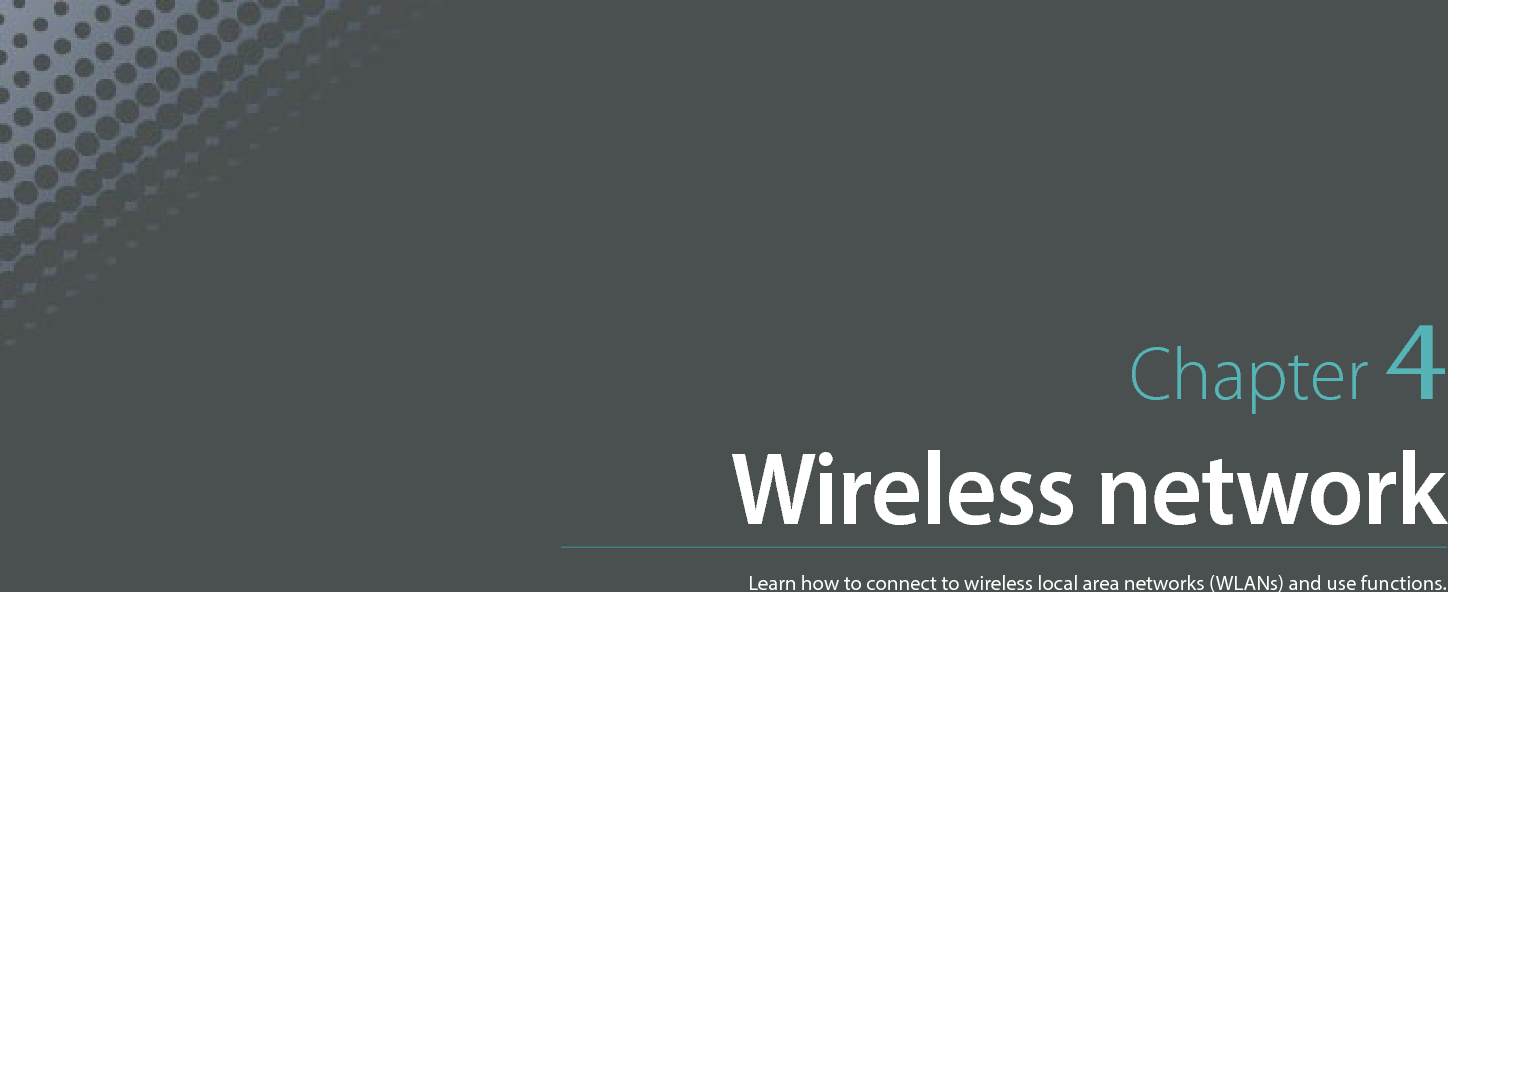 Chapter 4Wireless networkLearn how to connect to wireless local area networks (WLANs) and use functions.